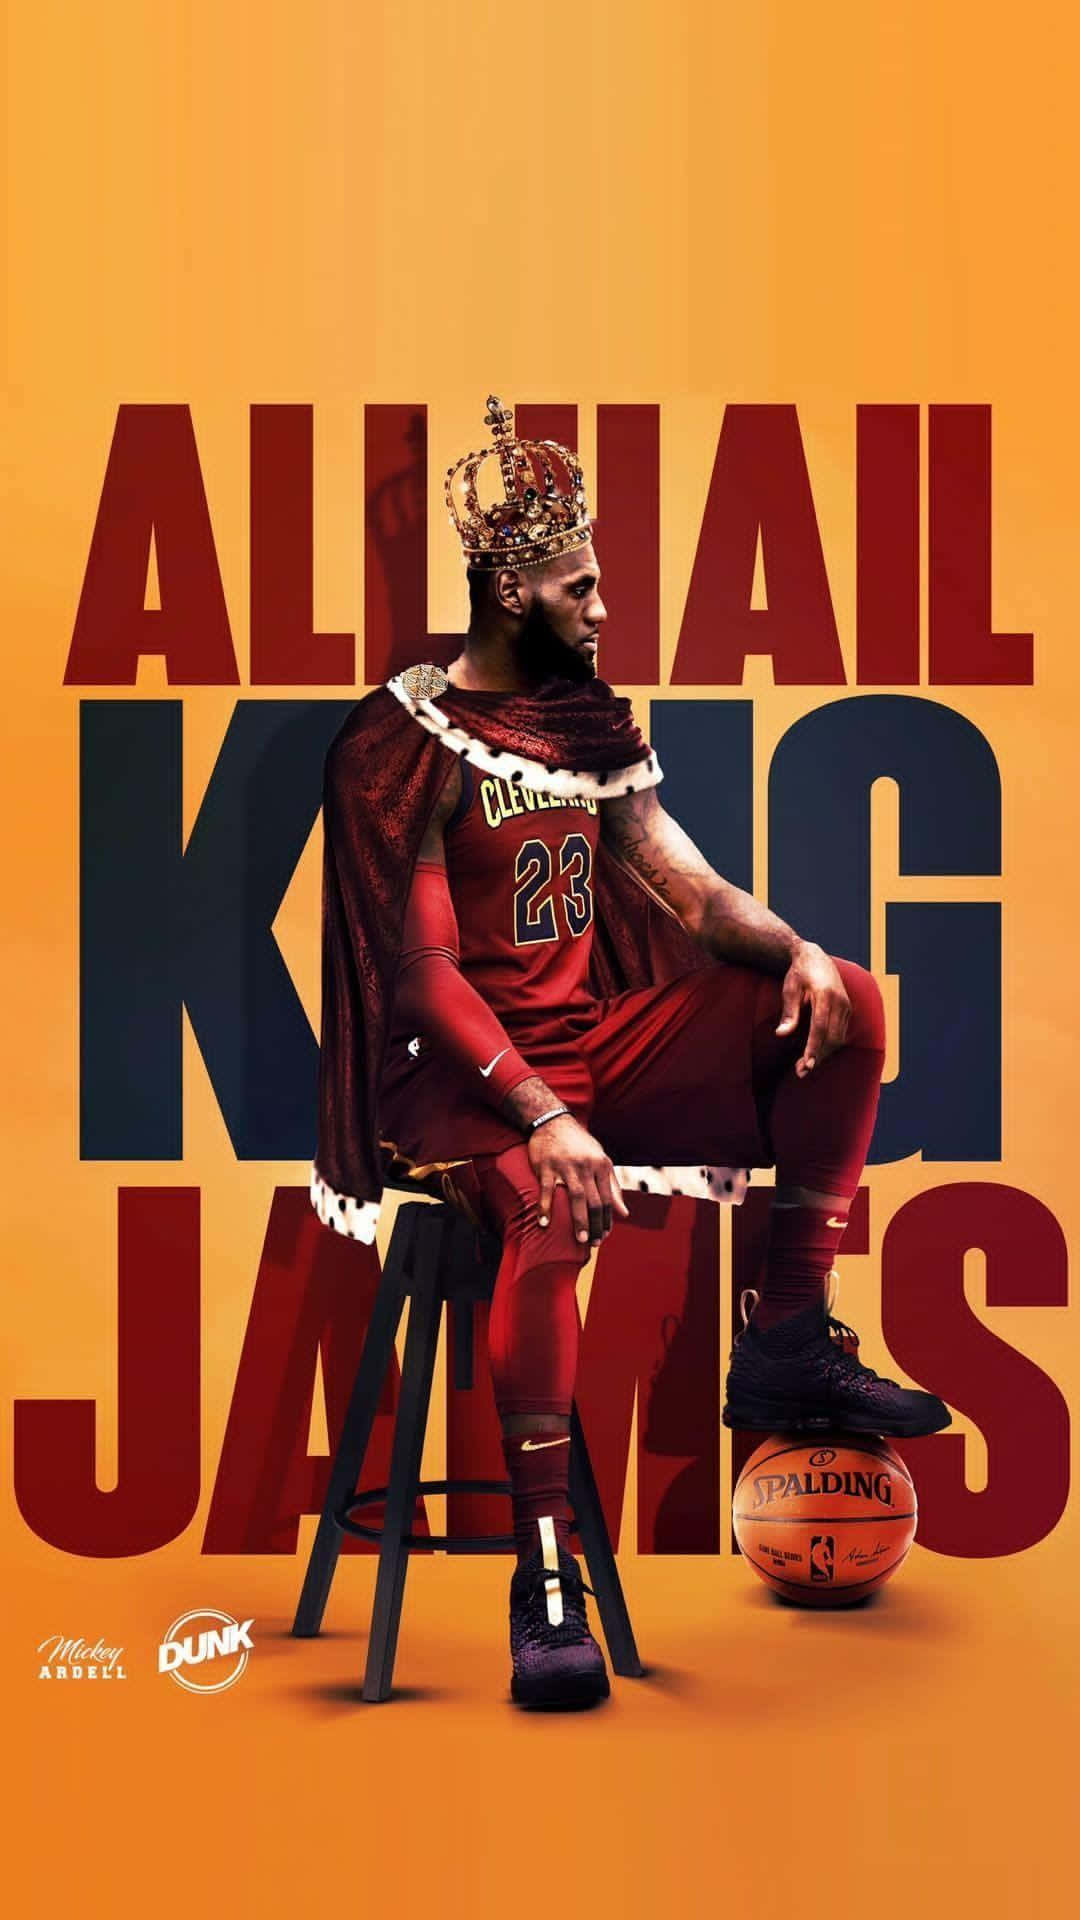 King Lebron James standing in front of an arena, ready to make history. Wallpaper